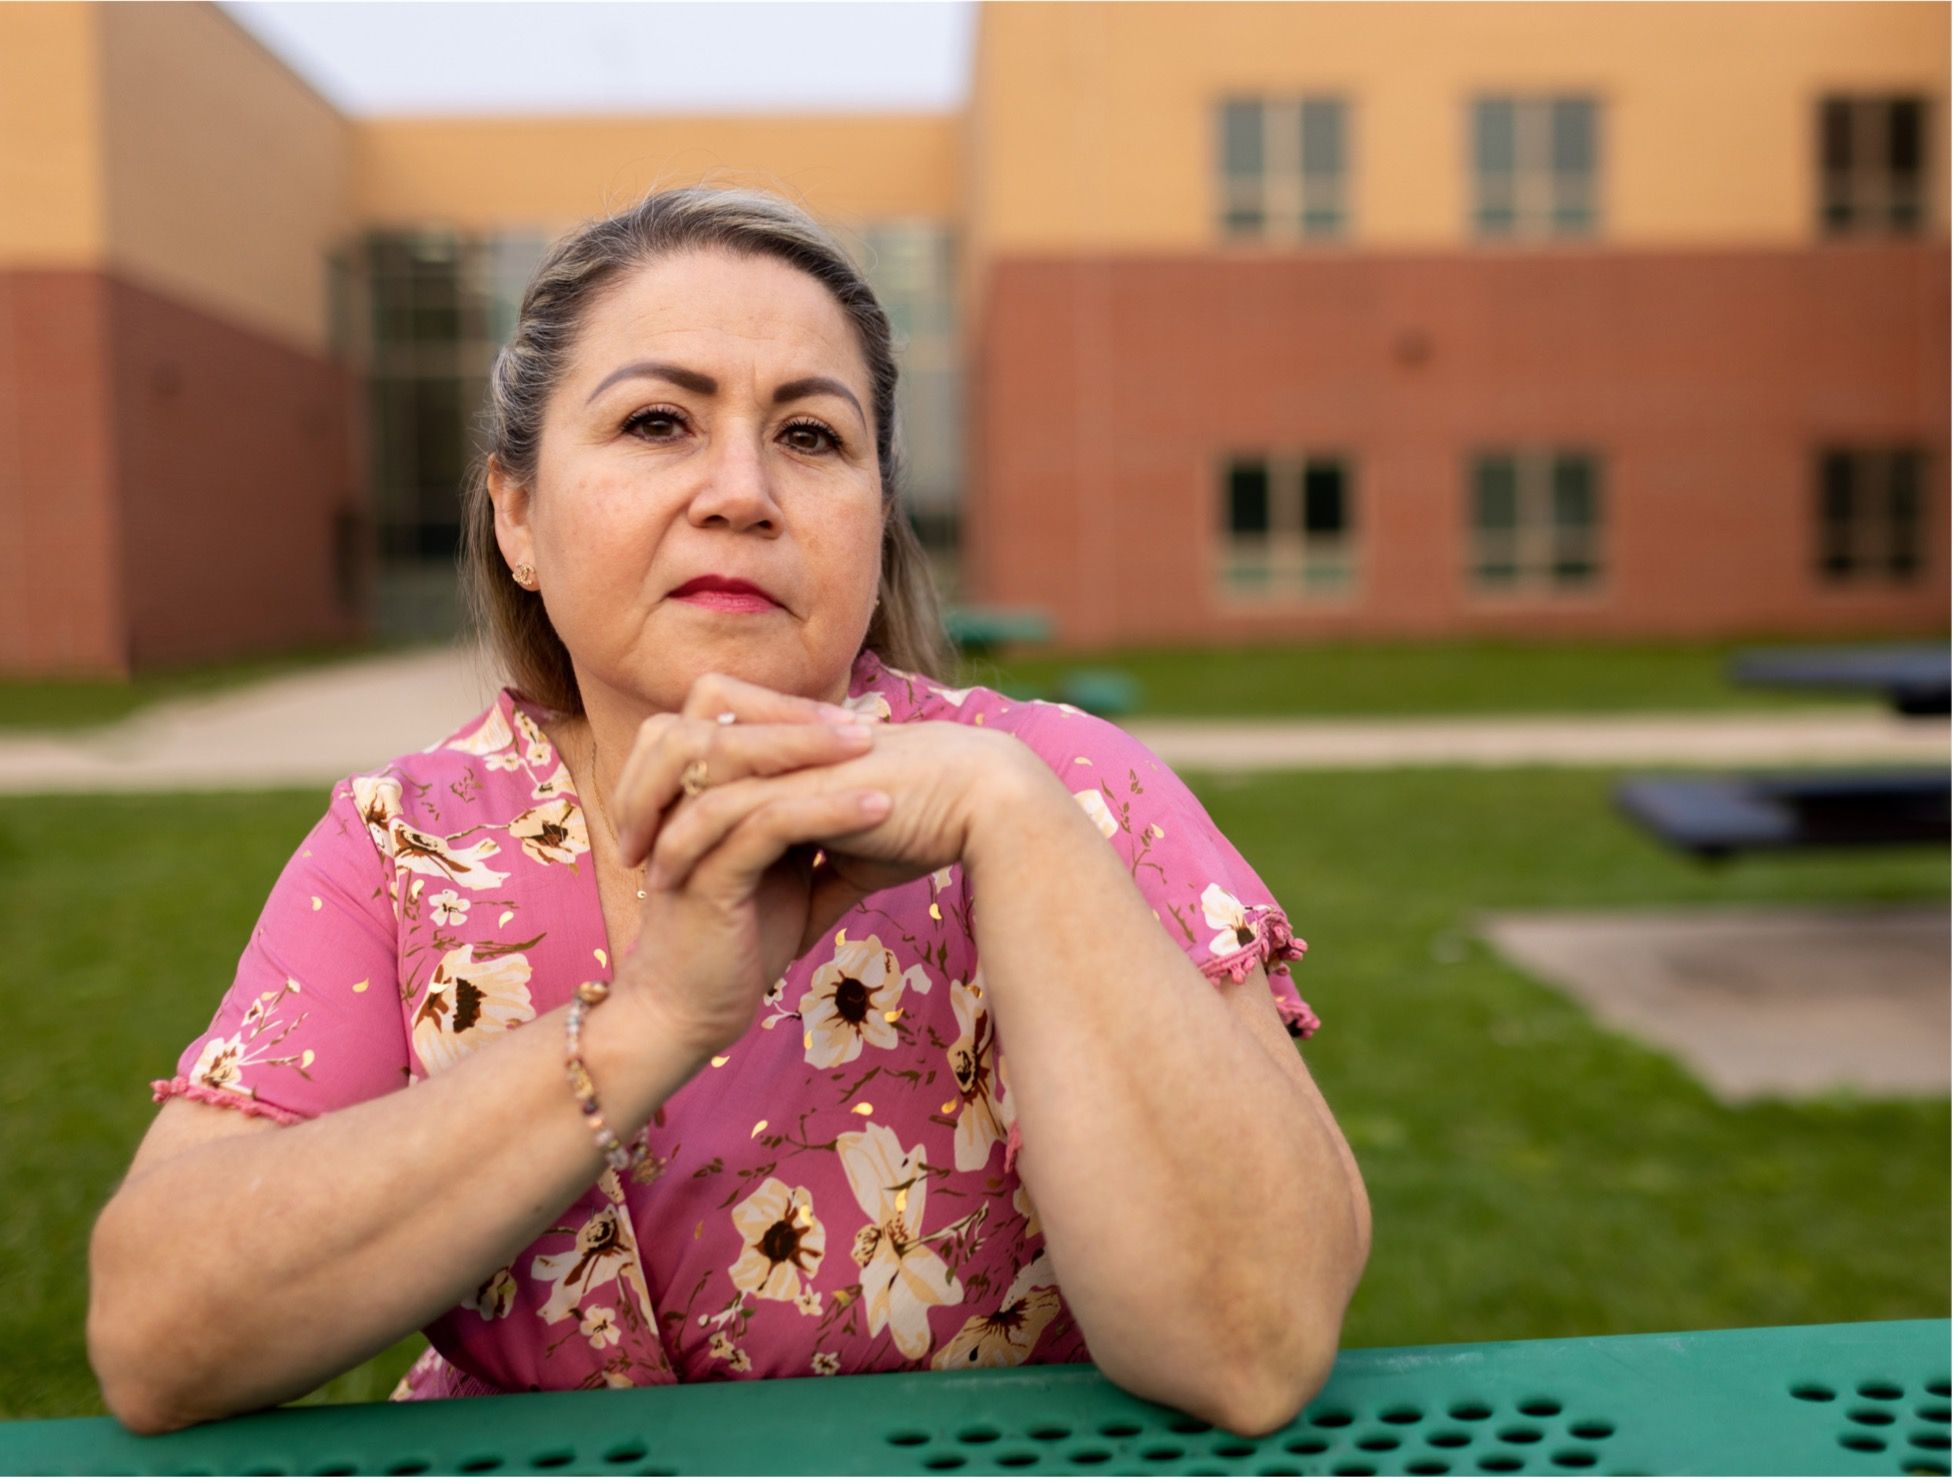 Zulma Zoraida Limas Rodriguez sitting outside, looking at the camera unsmiling with her chin in her hands | Photo by Sharon Vanorny